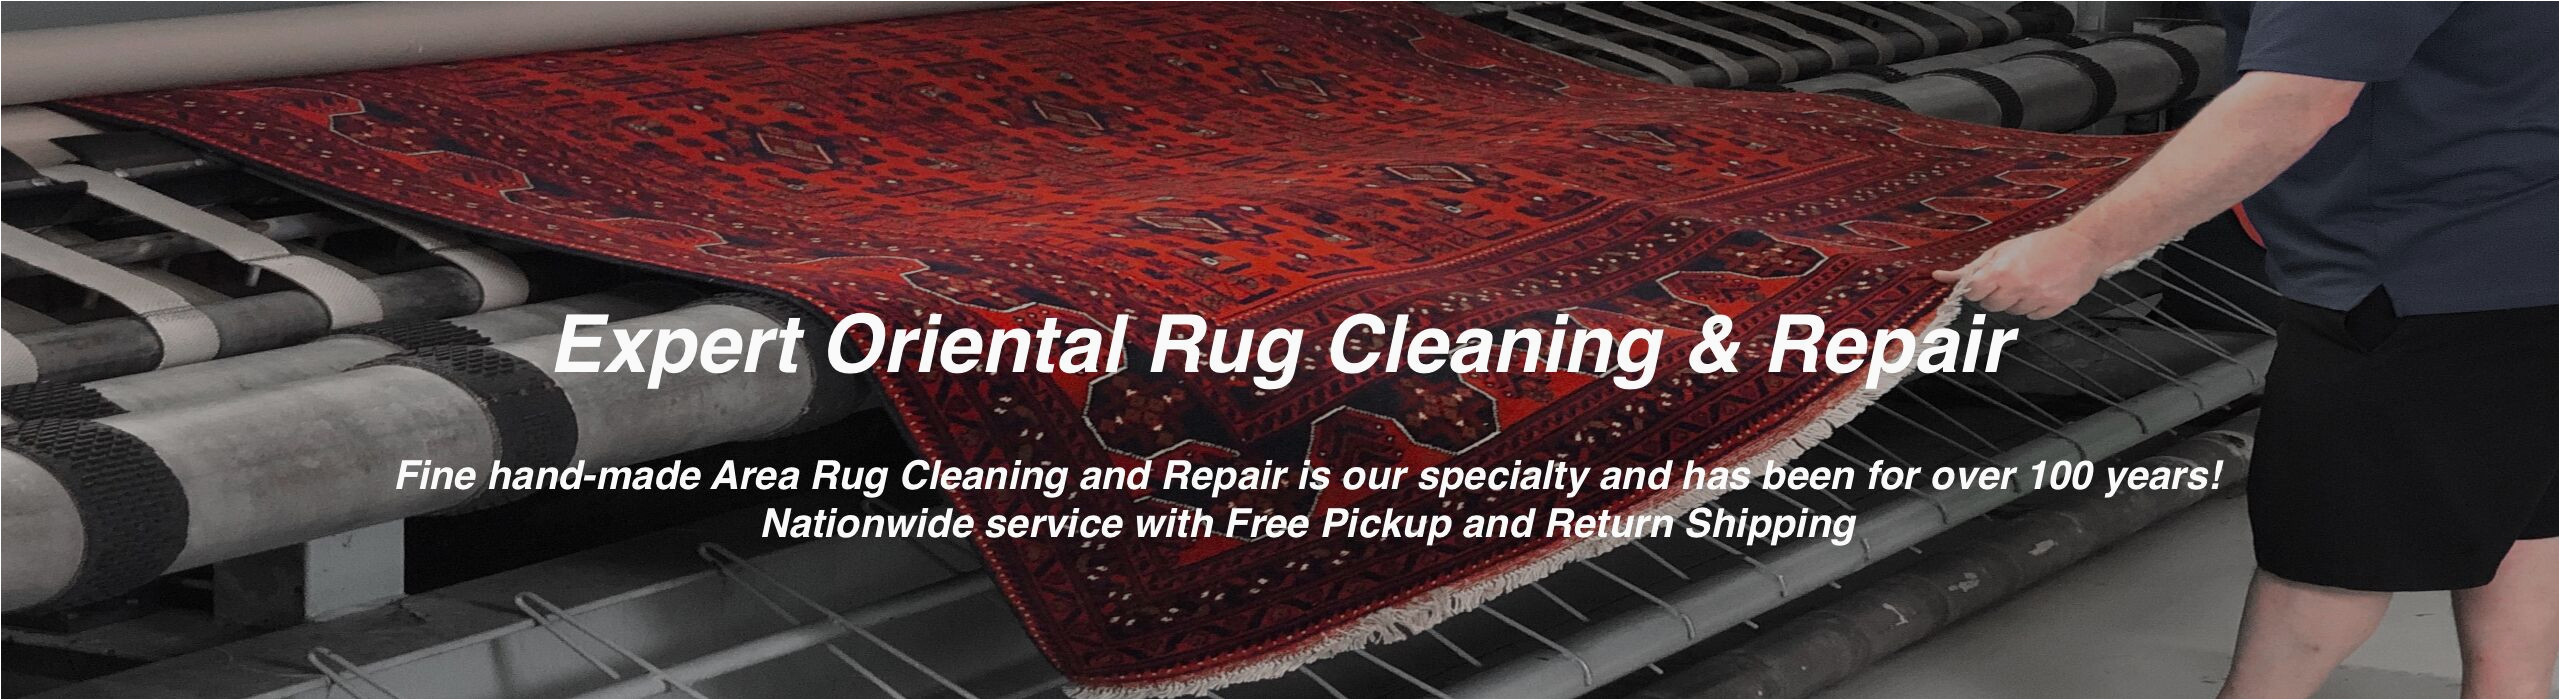 Area Rug Repair Services Near Me Professional area Rug Cleaning & Repair Rugspa